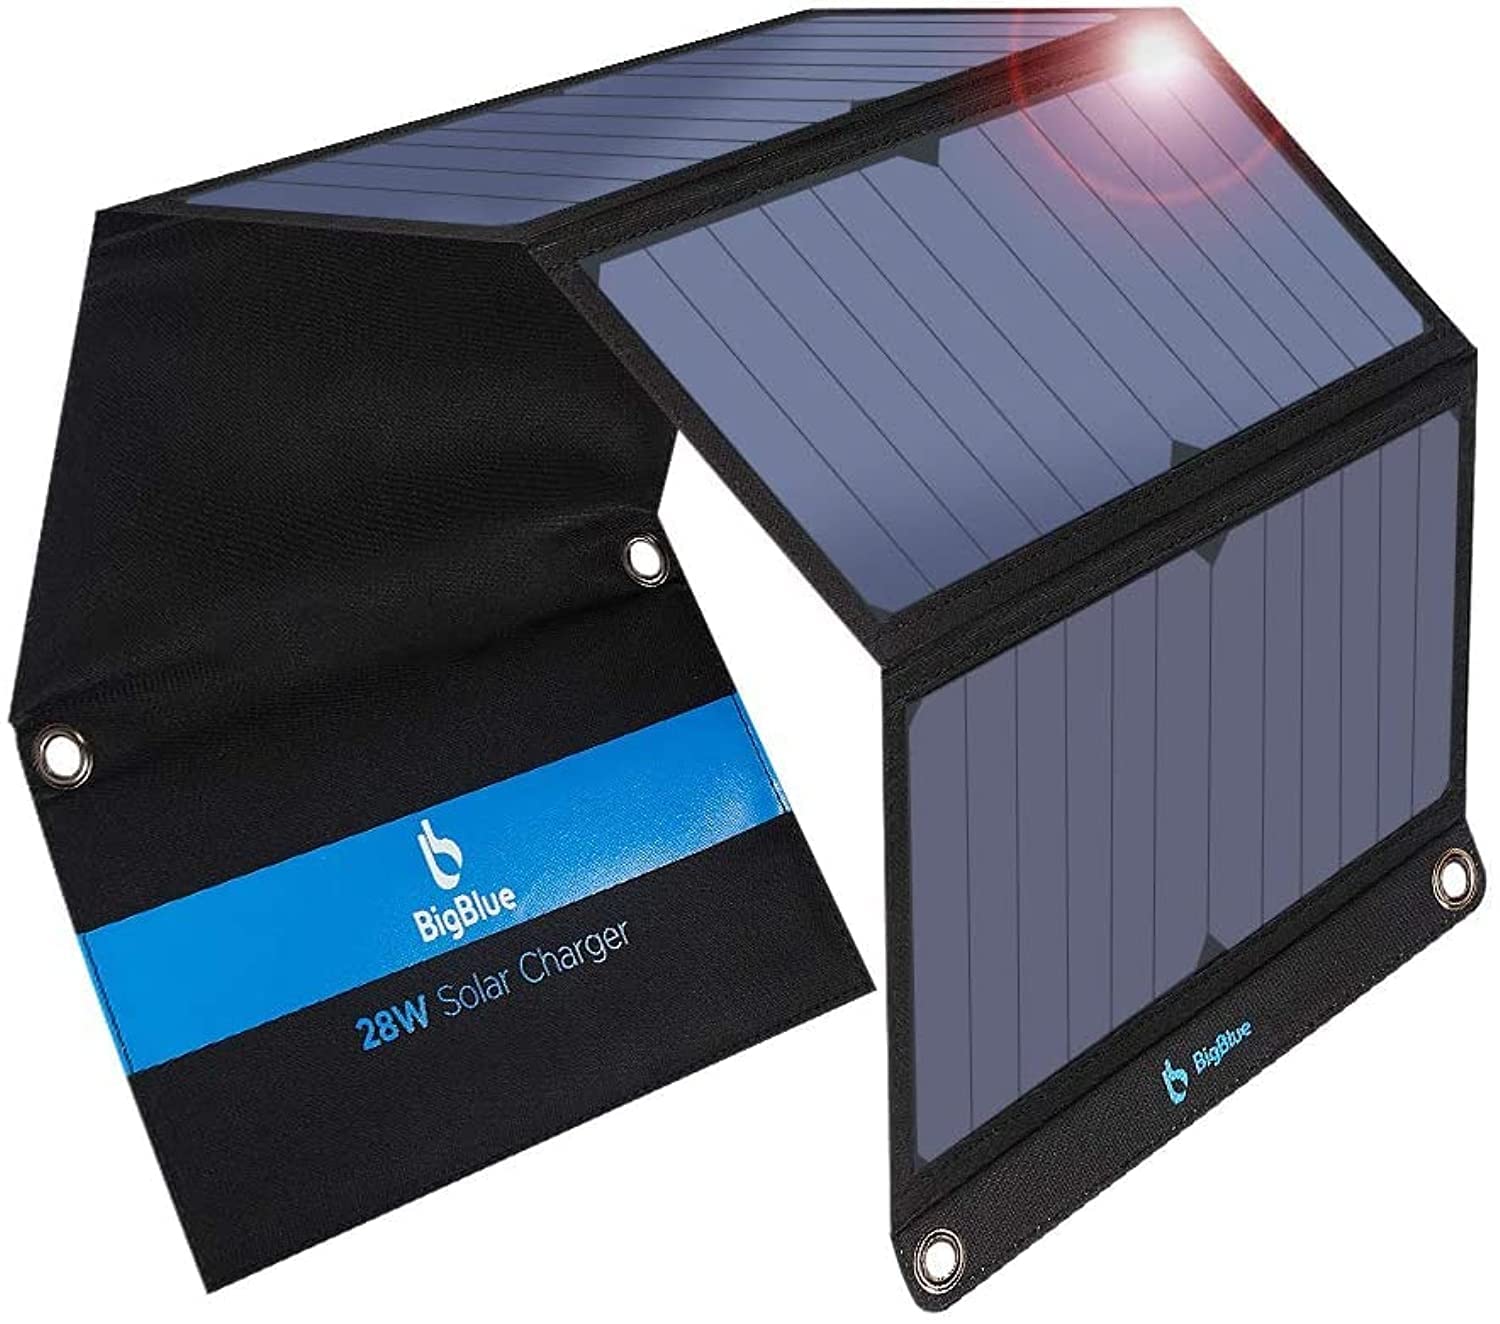 BigBlue Solar Charger, 28W Solar Panel with Dual USB Ports & Digital Ammeter Great for Camping Travel Waterproof Foldable for iPhone 8 / X / 7 / 6S, Ipad Pro/Air 2 / Mini, Galaxy S8 / S7 / S6 /-Black